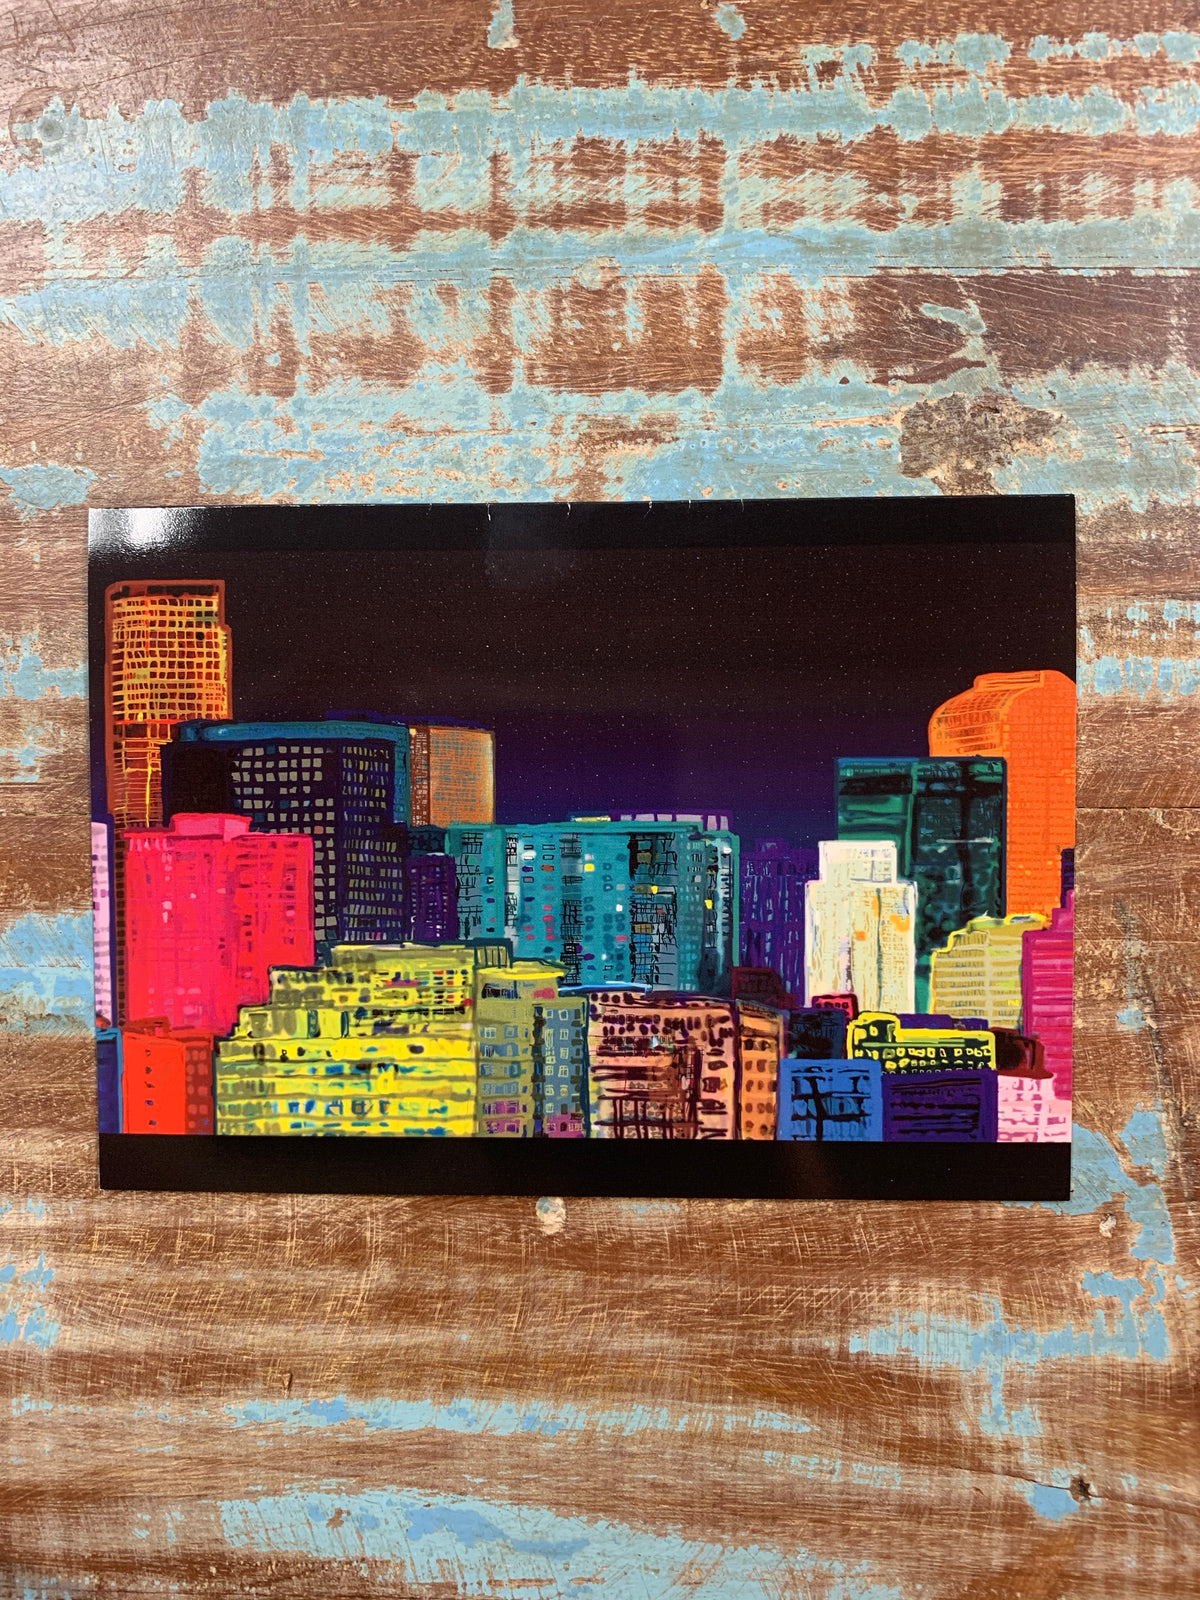 5x7 Greeting Card Version of "Denver, Night" by Topher Strauss